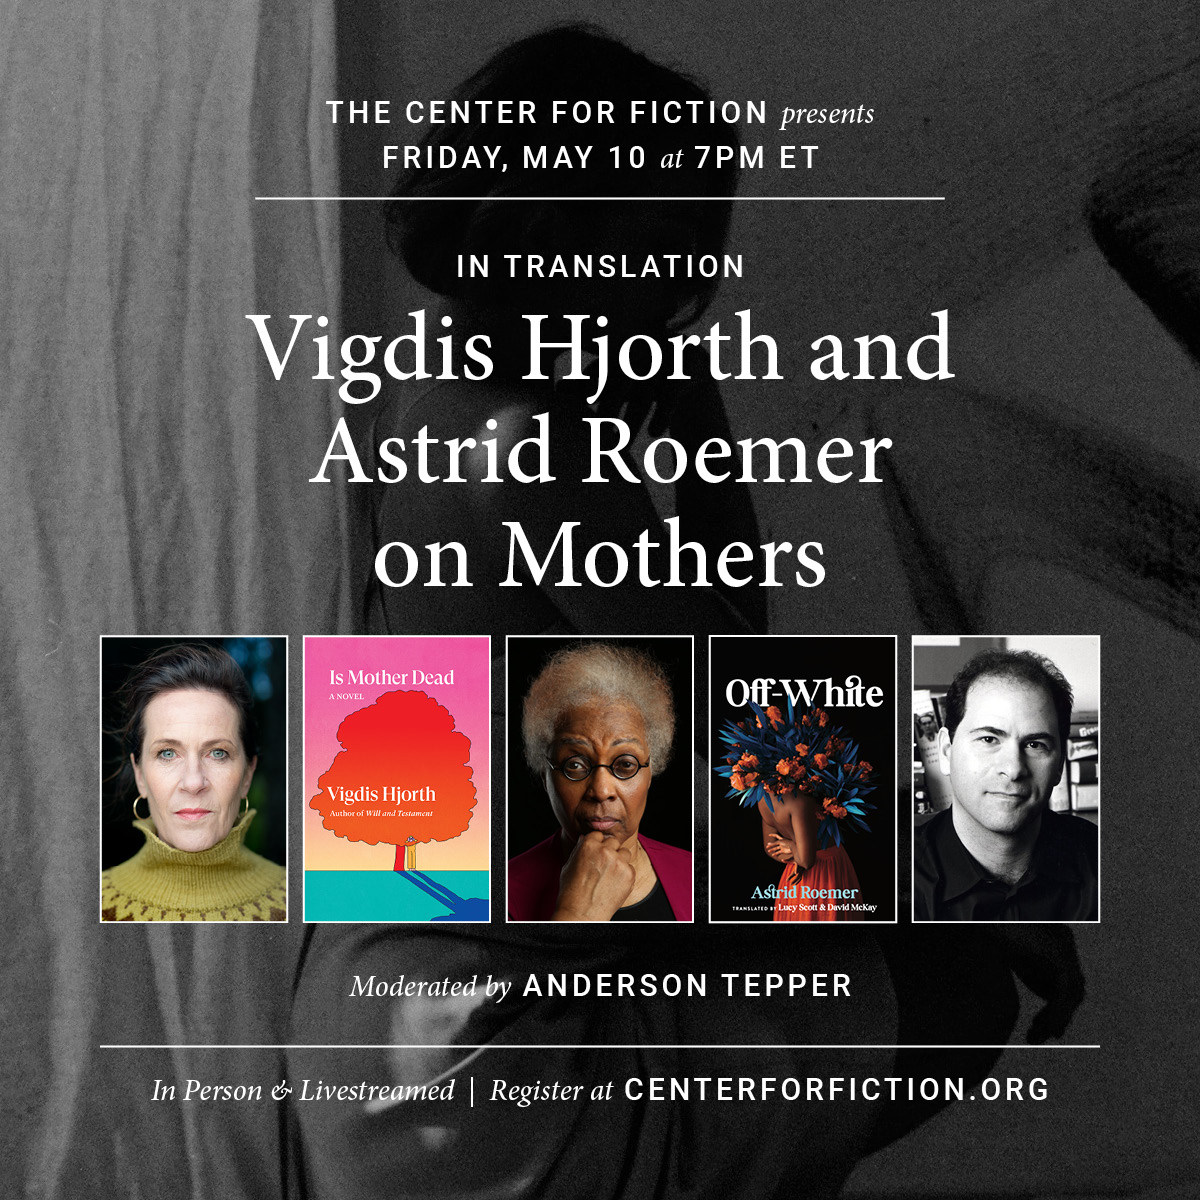 Tonight in NYC! Vigdis Hjorth and Astrid Roemer, icons of Norwegian and Dutch-language literature, join the @Center4Fiction for a discussion of their groundbreaking novels. centerforfiction.org/event/in-trans…